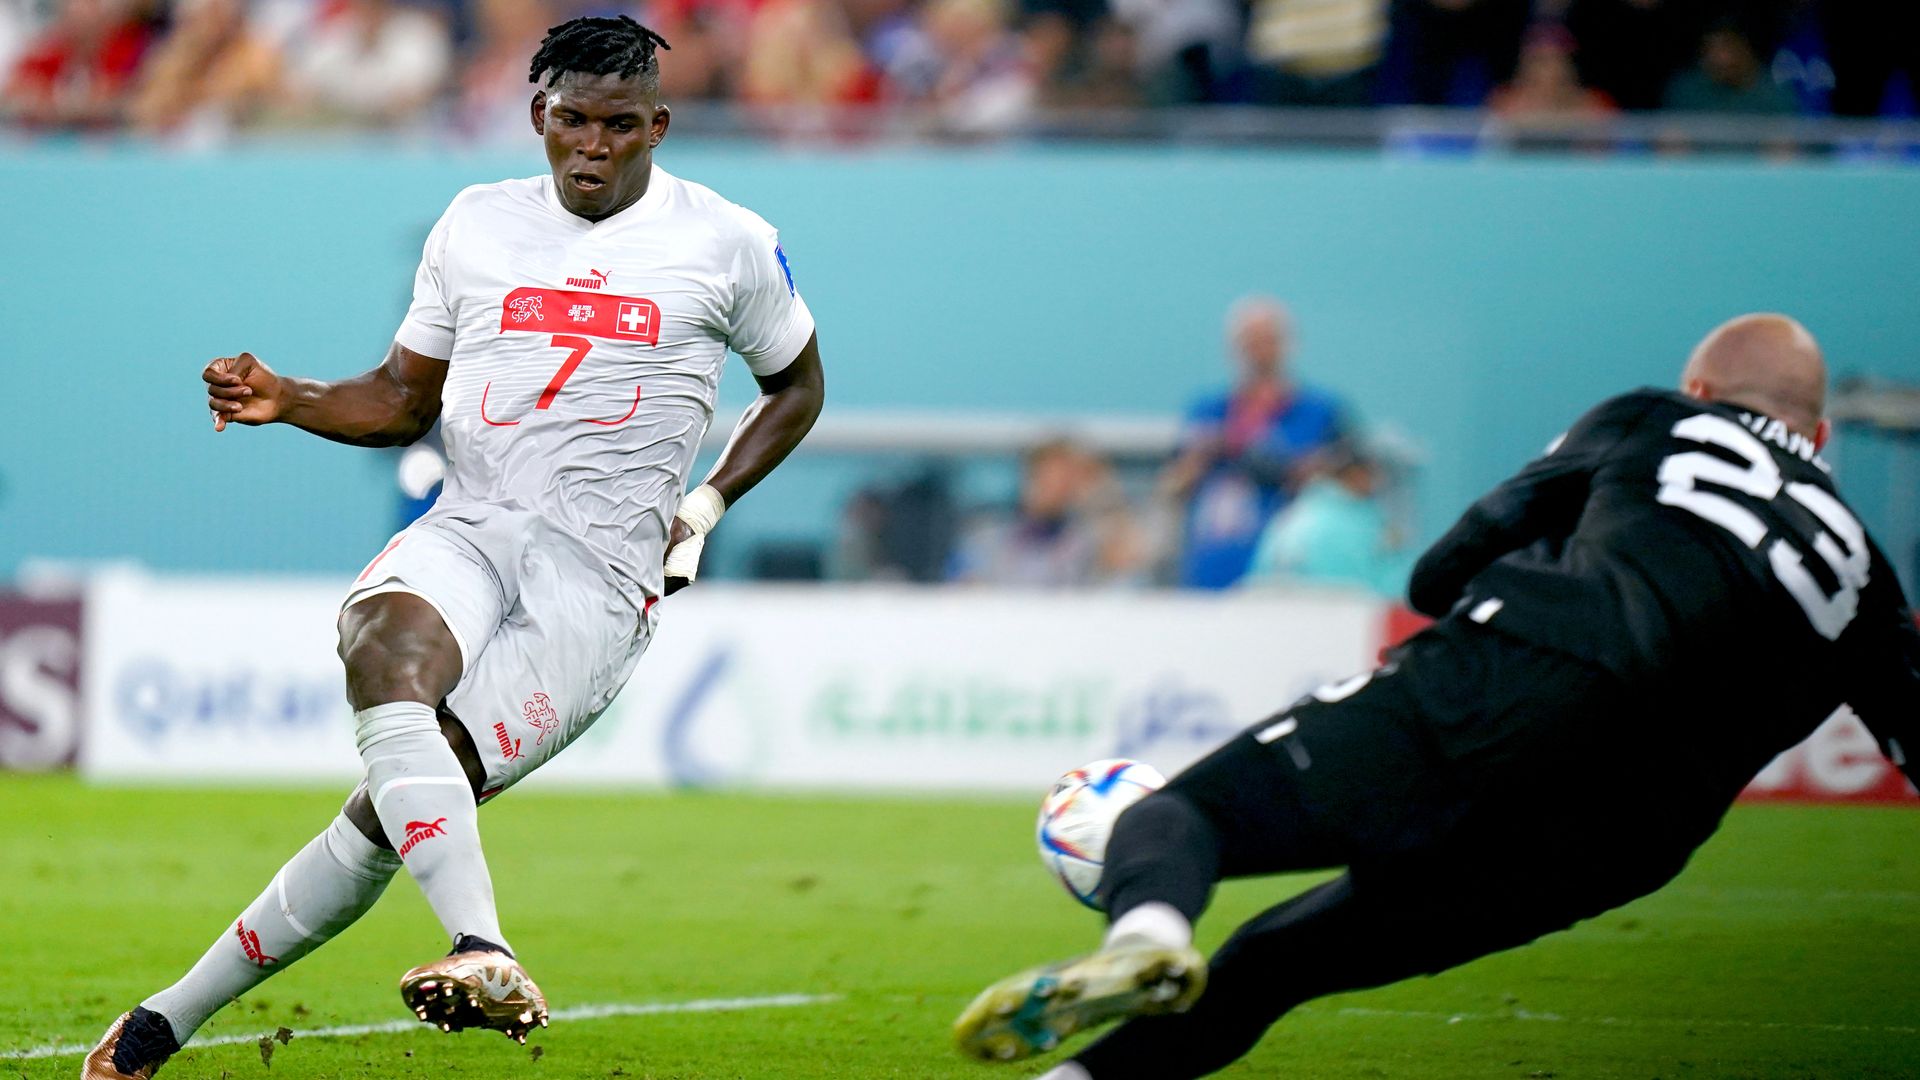 Embolo brings Switzerland level at 2-2 during incredible half vs Serbia LIVE!